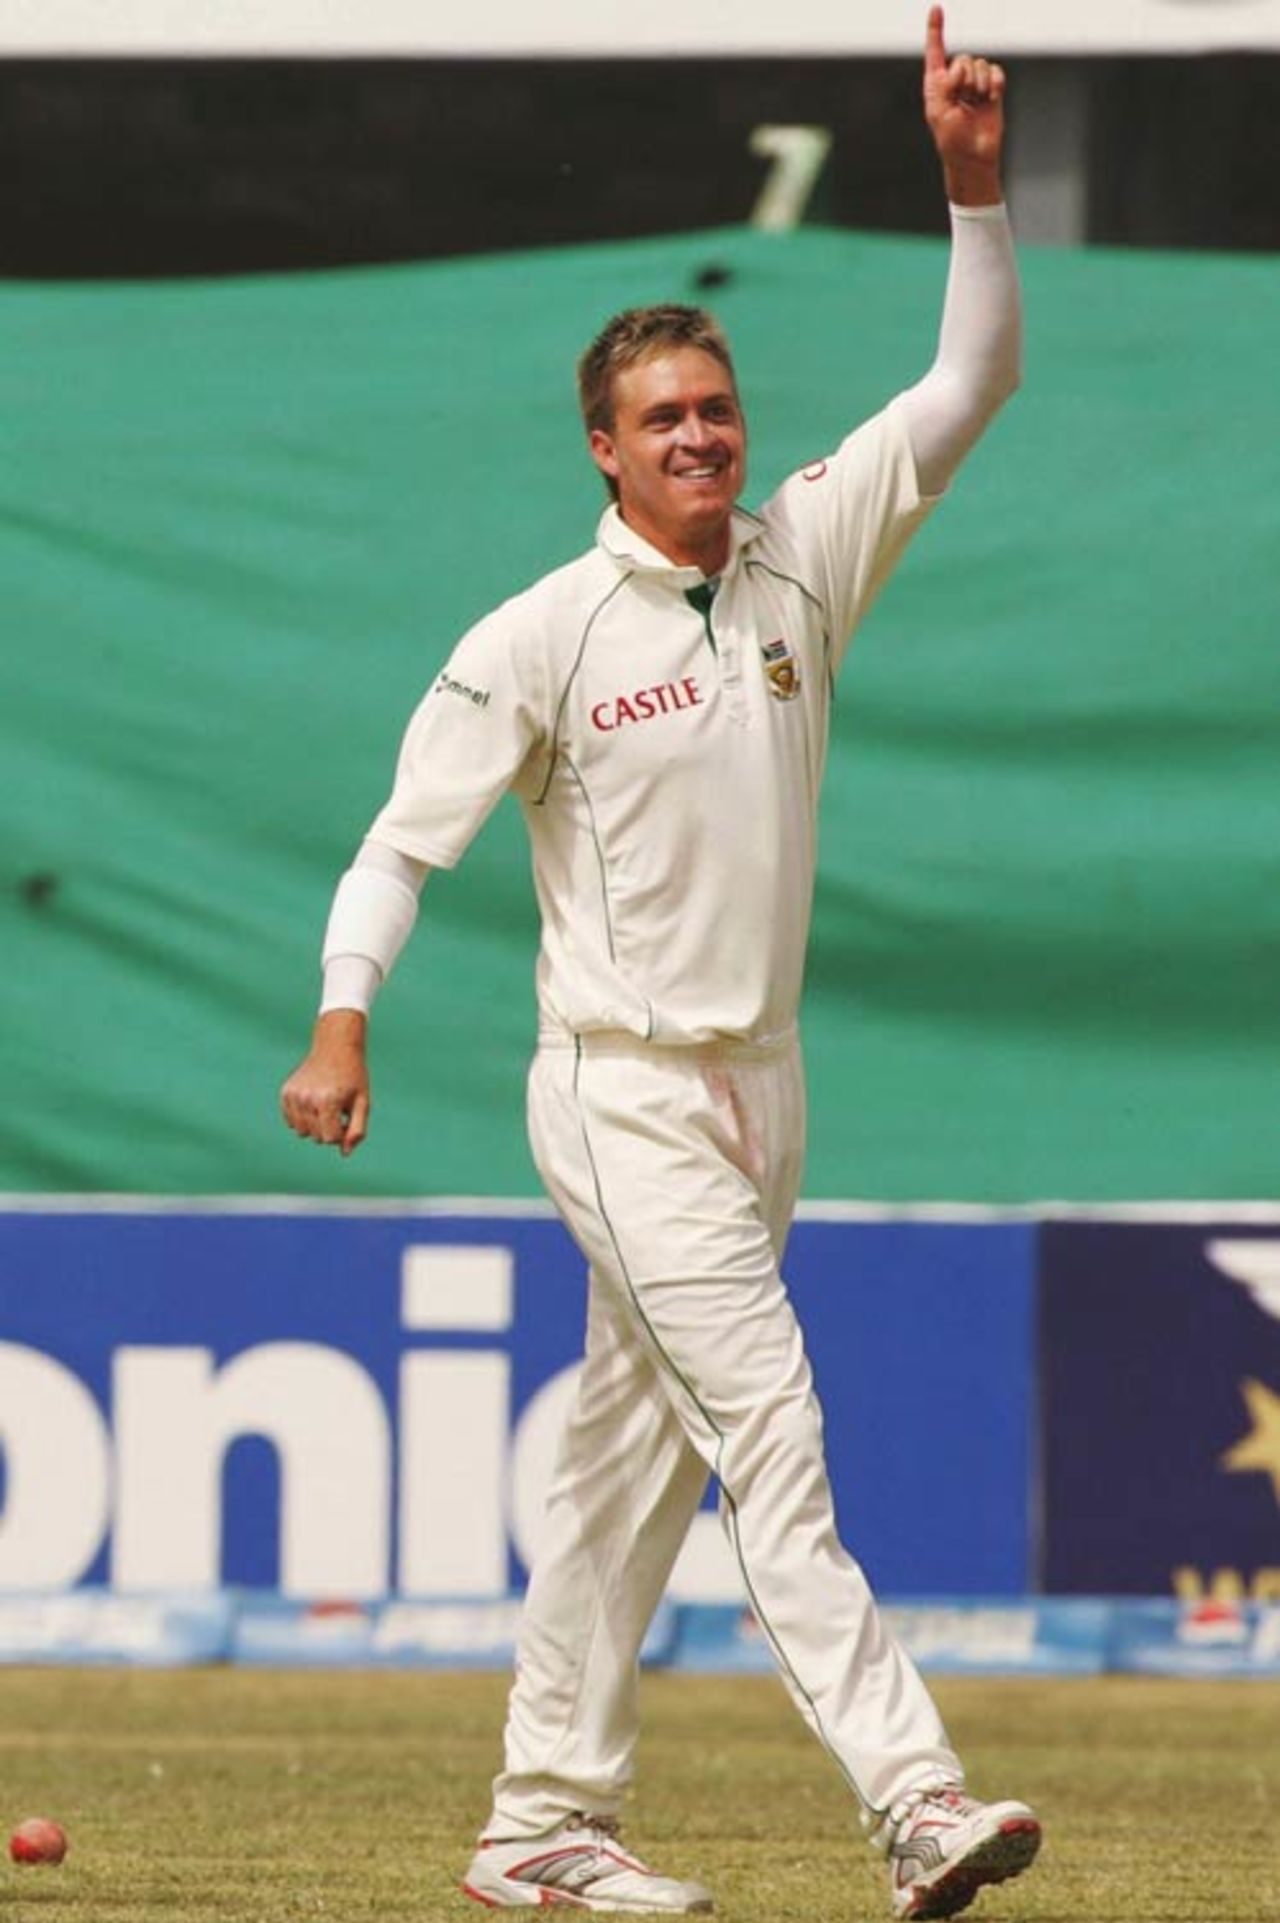 Harris added three wickets to his overnight tally to end with his first Test five-for, Pakistan v South Africa, 1st Test, Karachi, 3rd day, October 3, 2007